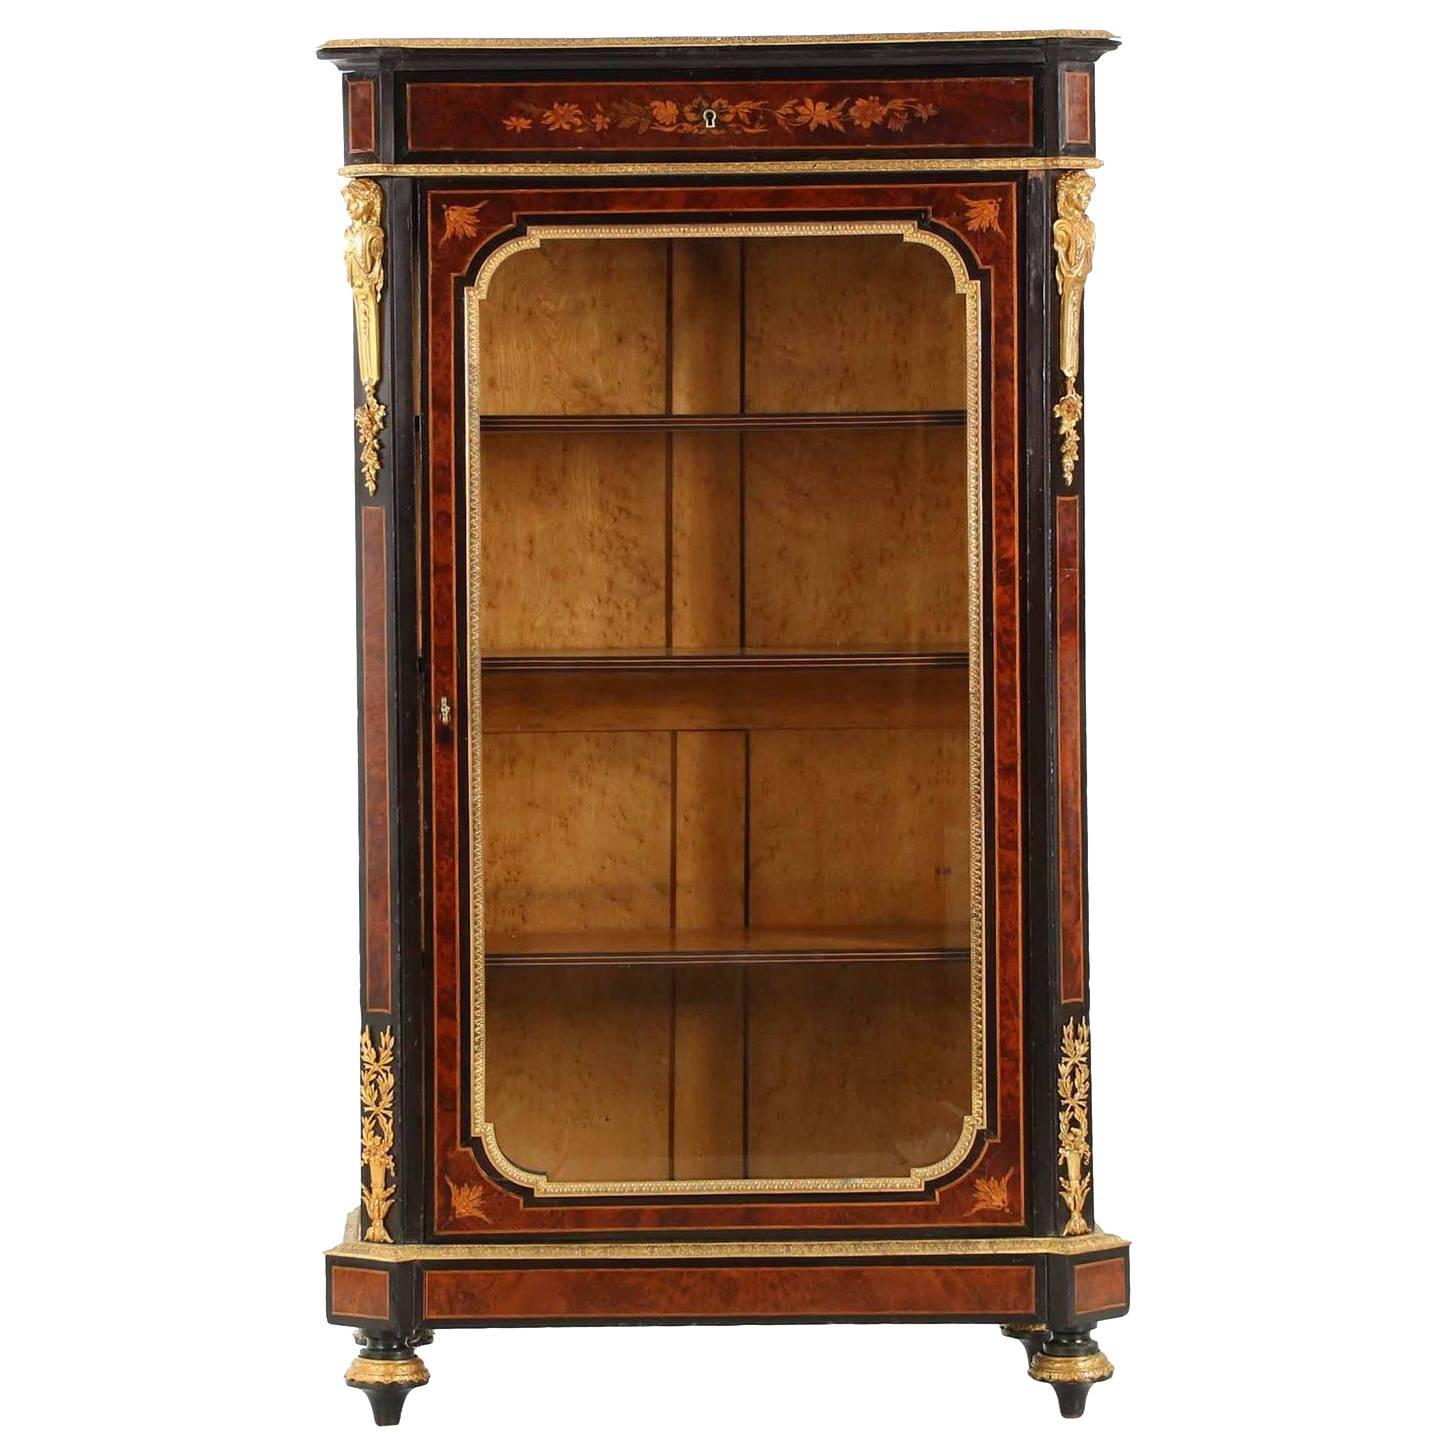 French Napoleon III Marquetry Inlaid Antique Bibliotheque Bookcase Cabinet